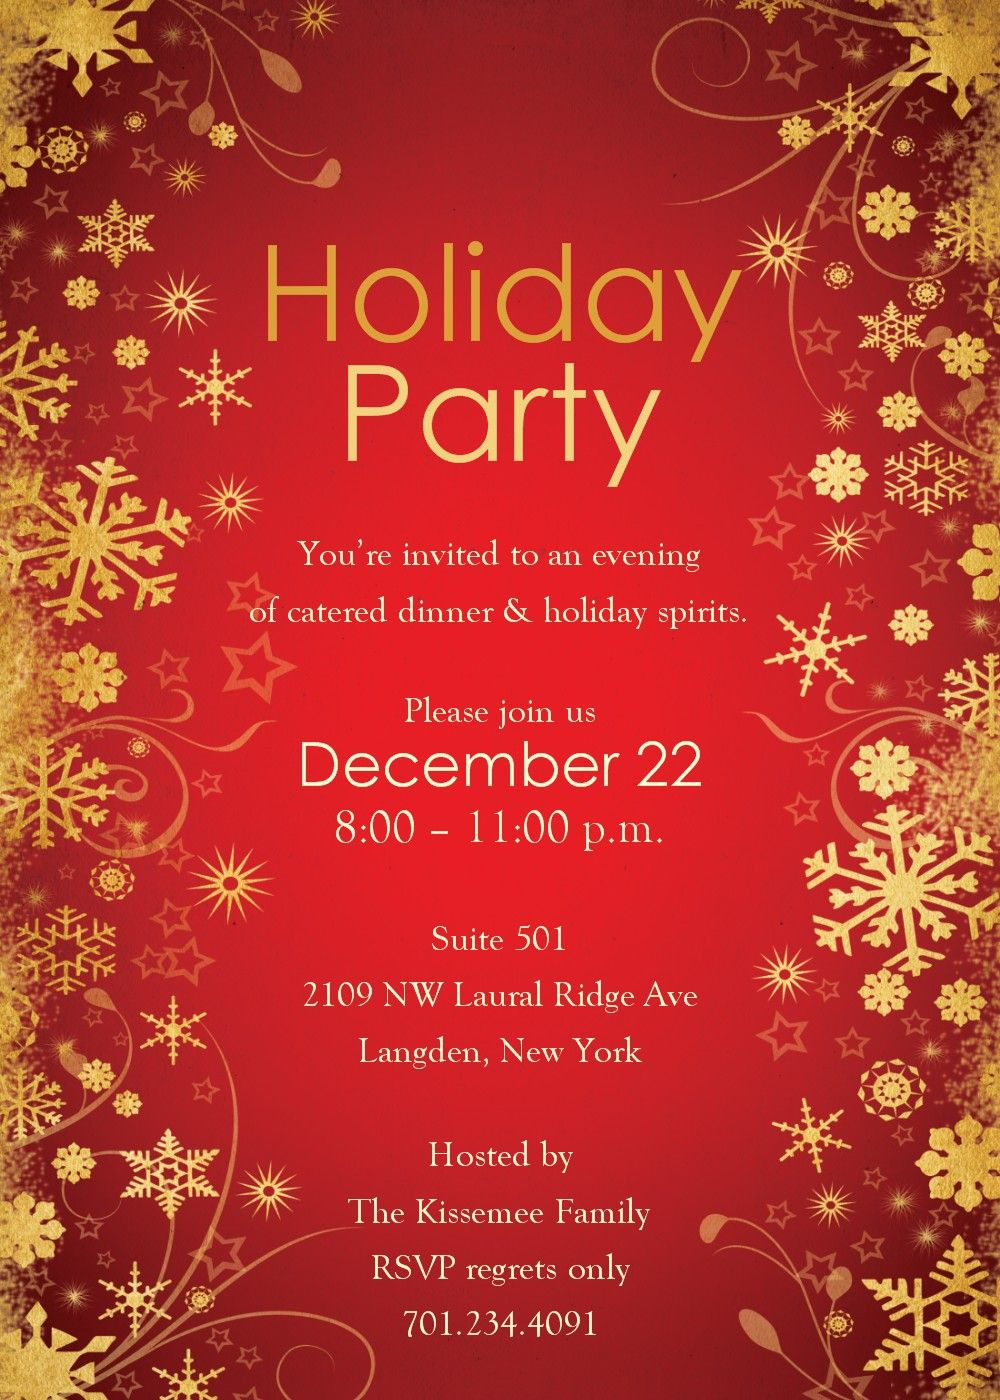 Christmas Party Flyer Template Free Download